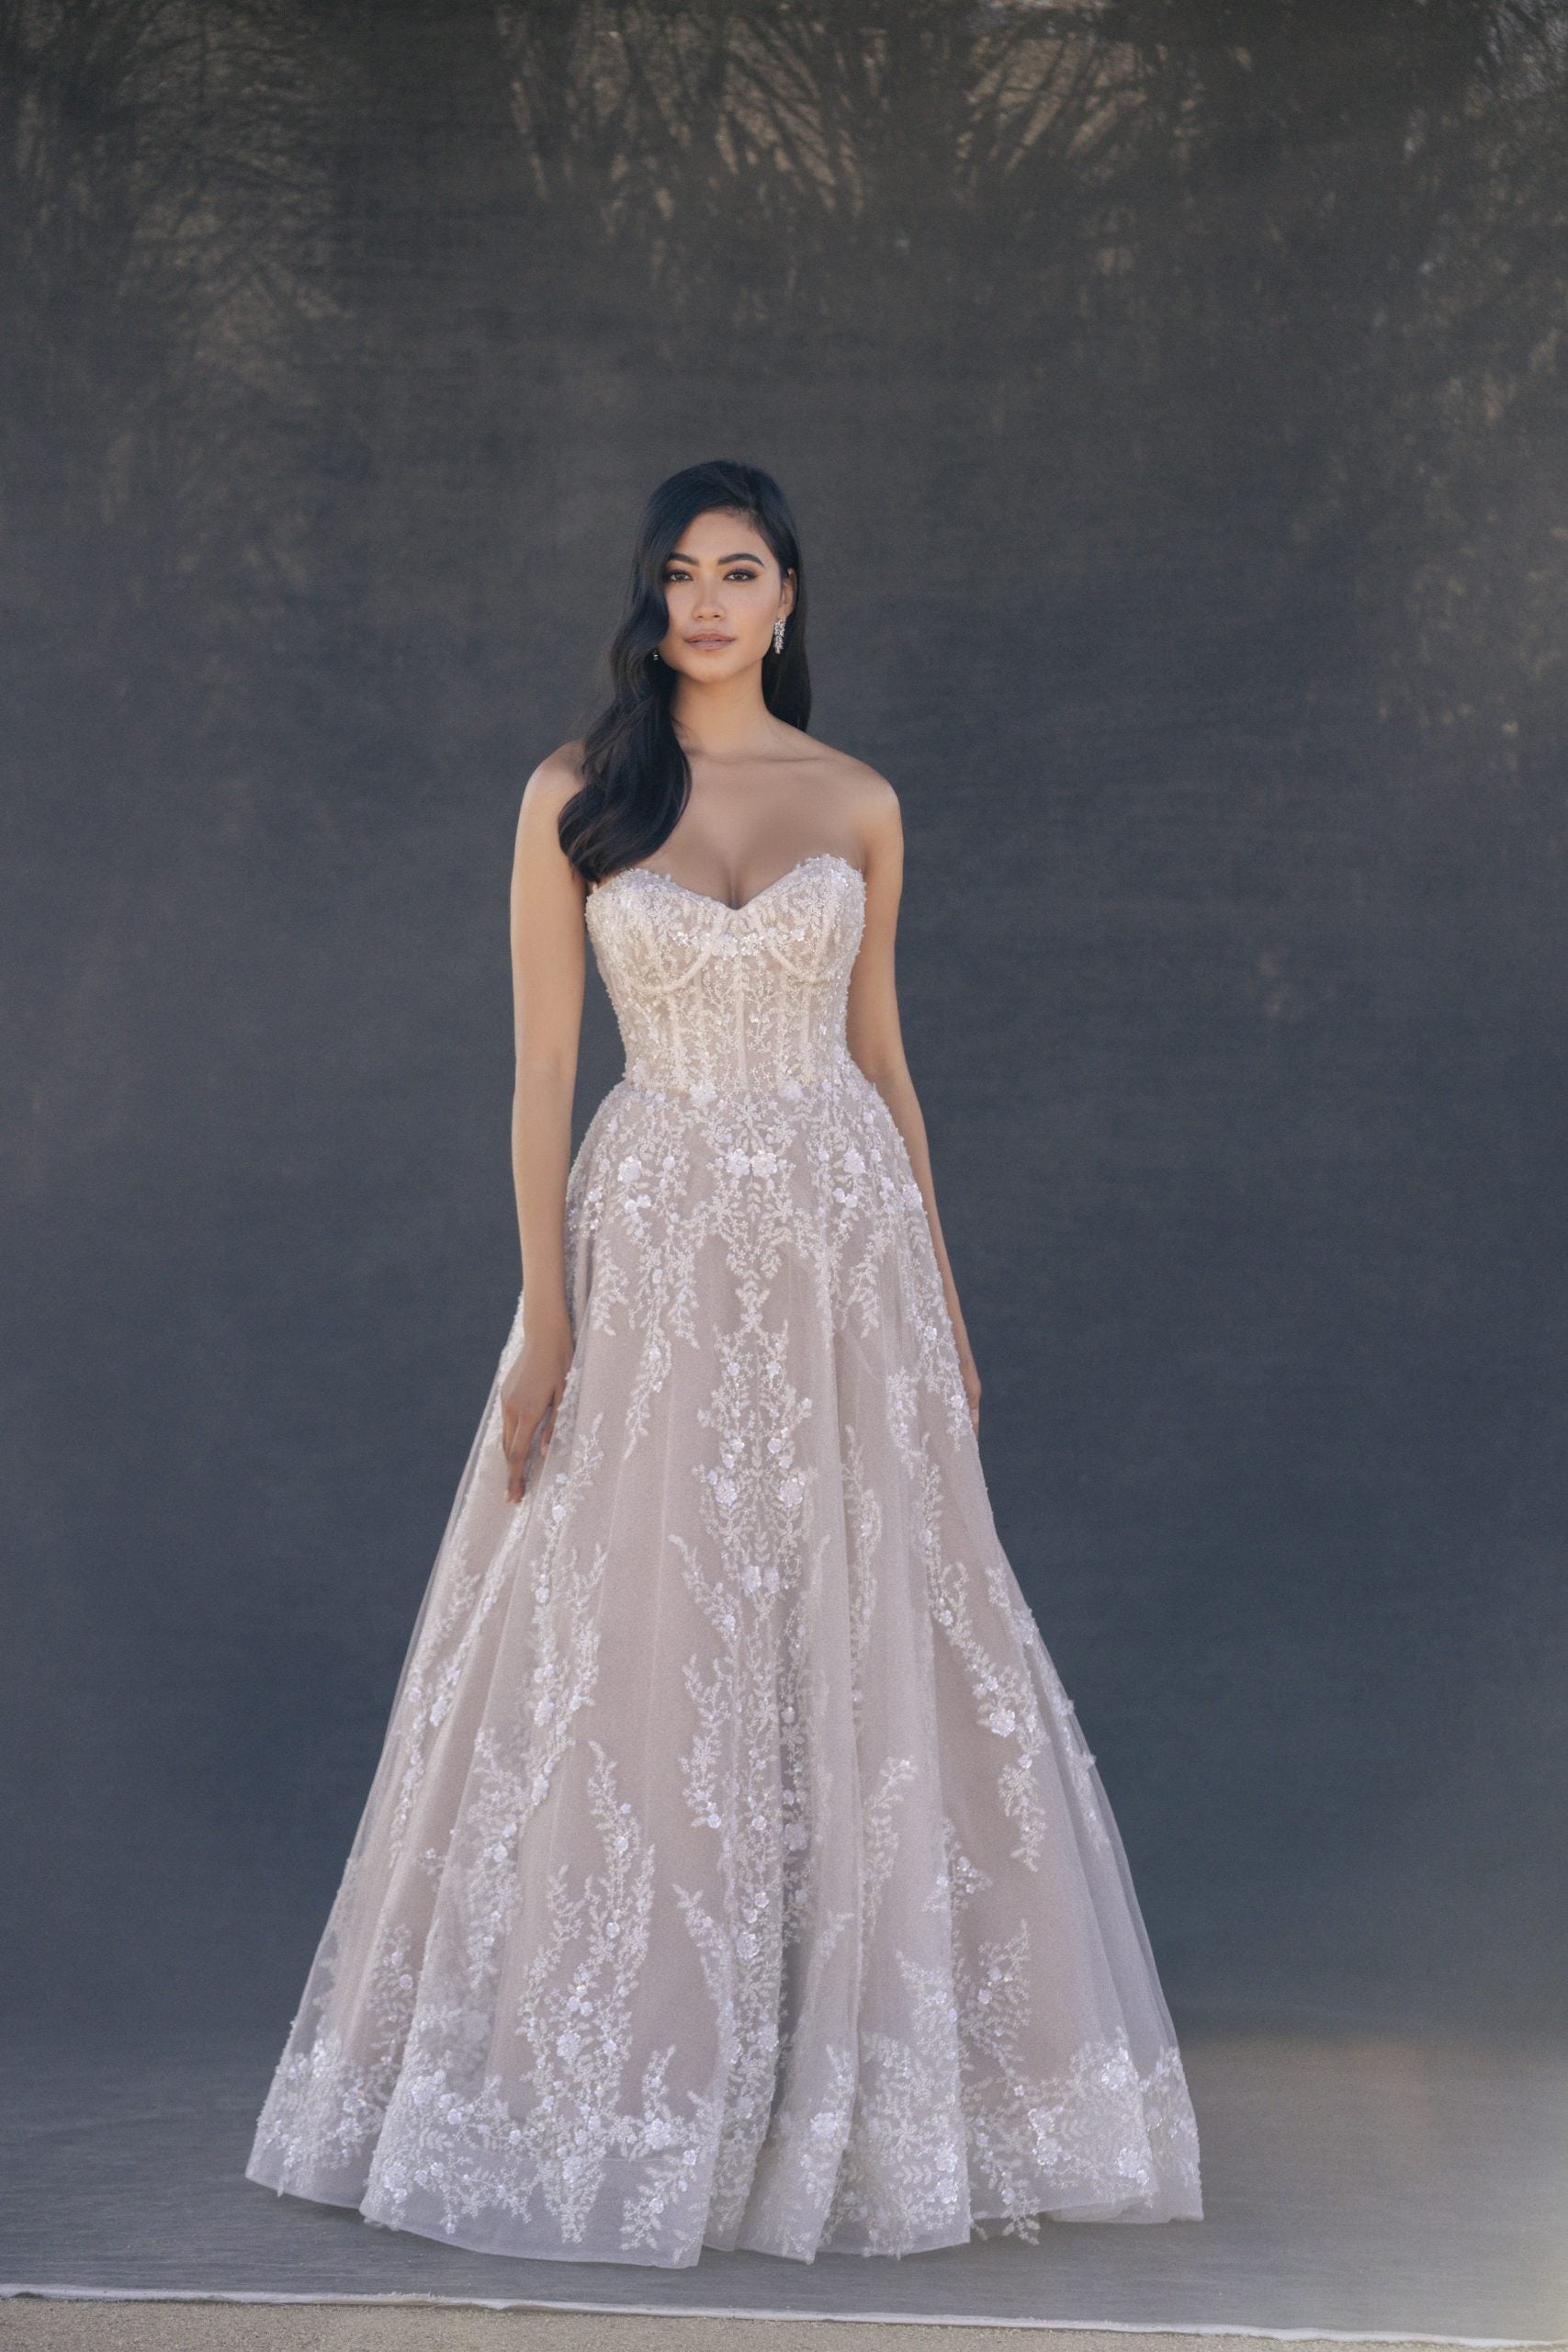 Corset A-Line Gown With Nature-Inspired Beading by Allure Bridals - Image 1